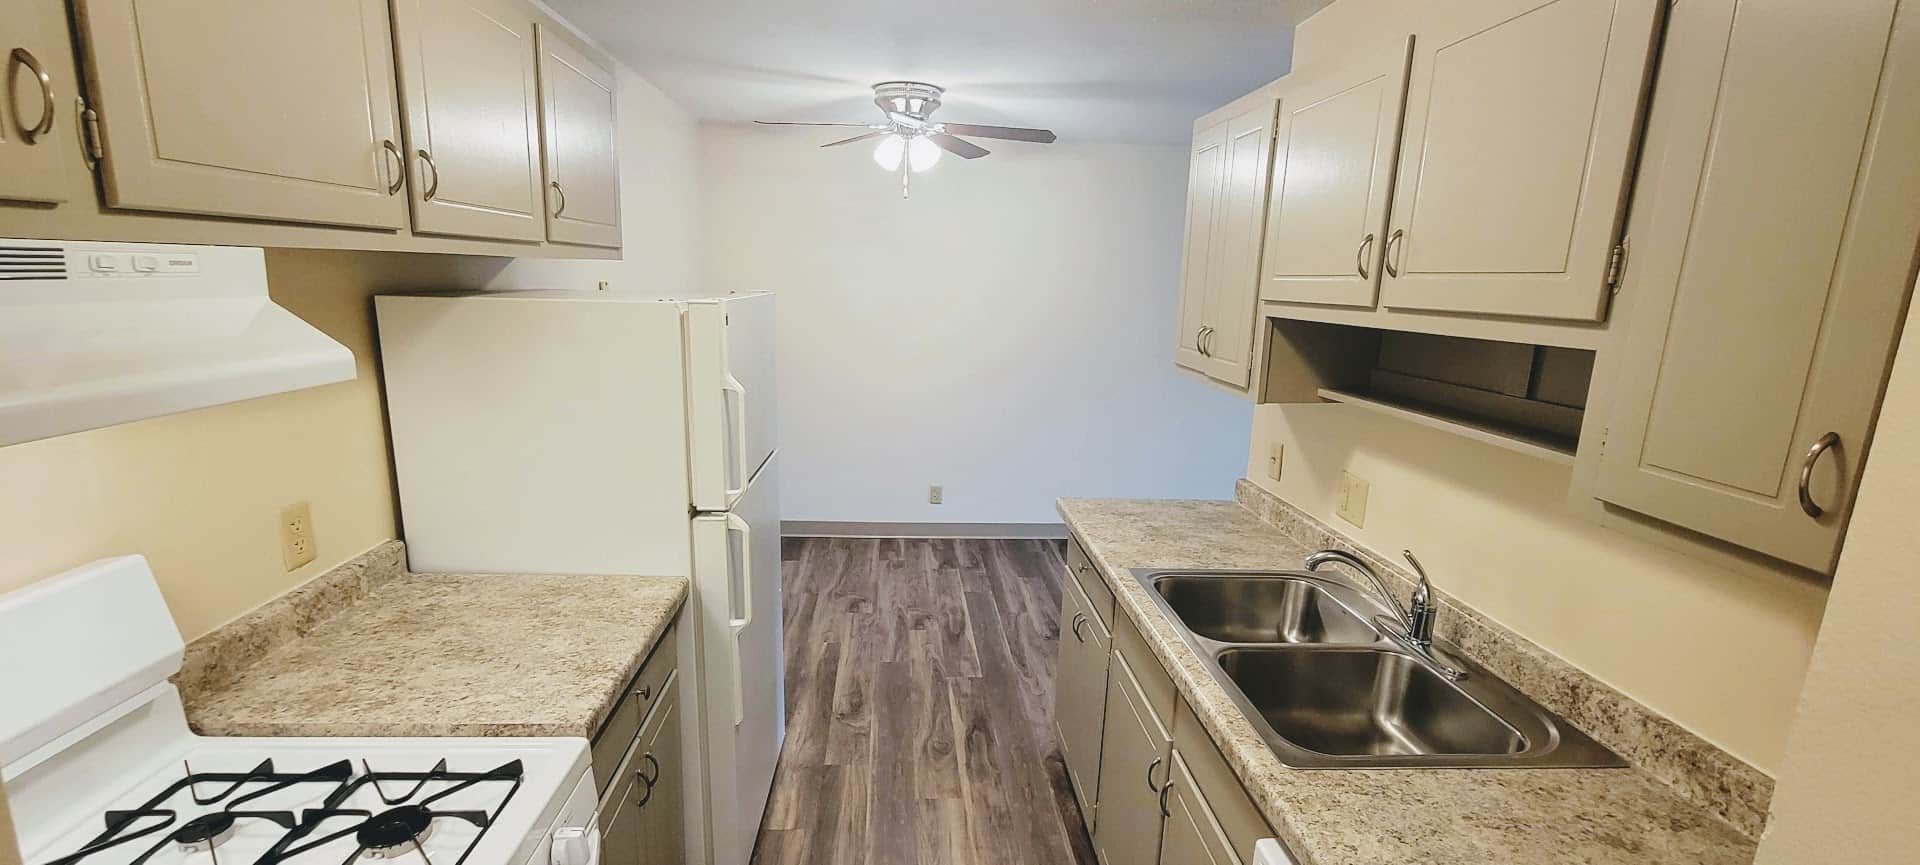 Apartment kitchen with new flooring and cabinets, dining room with a ceiling fan